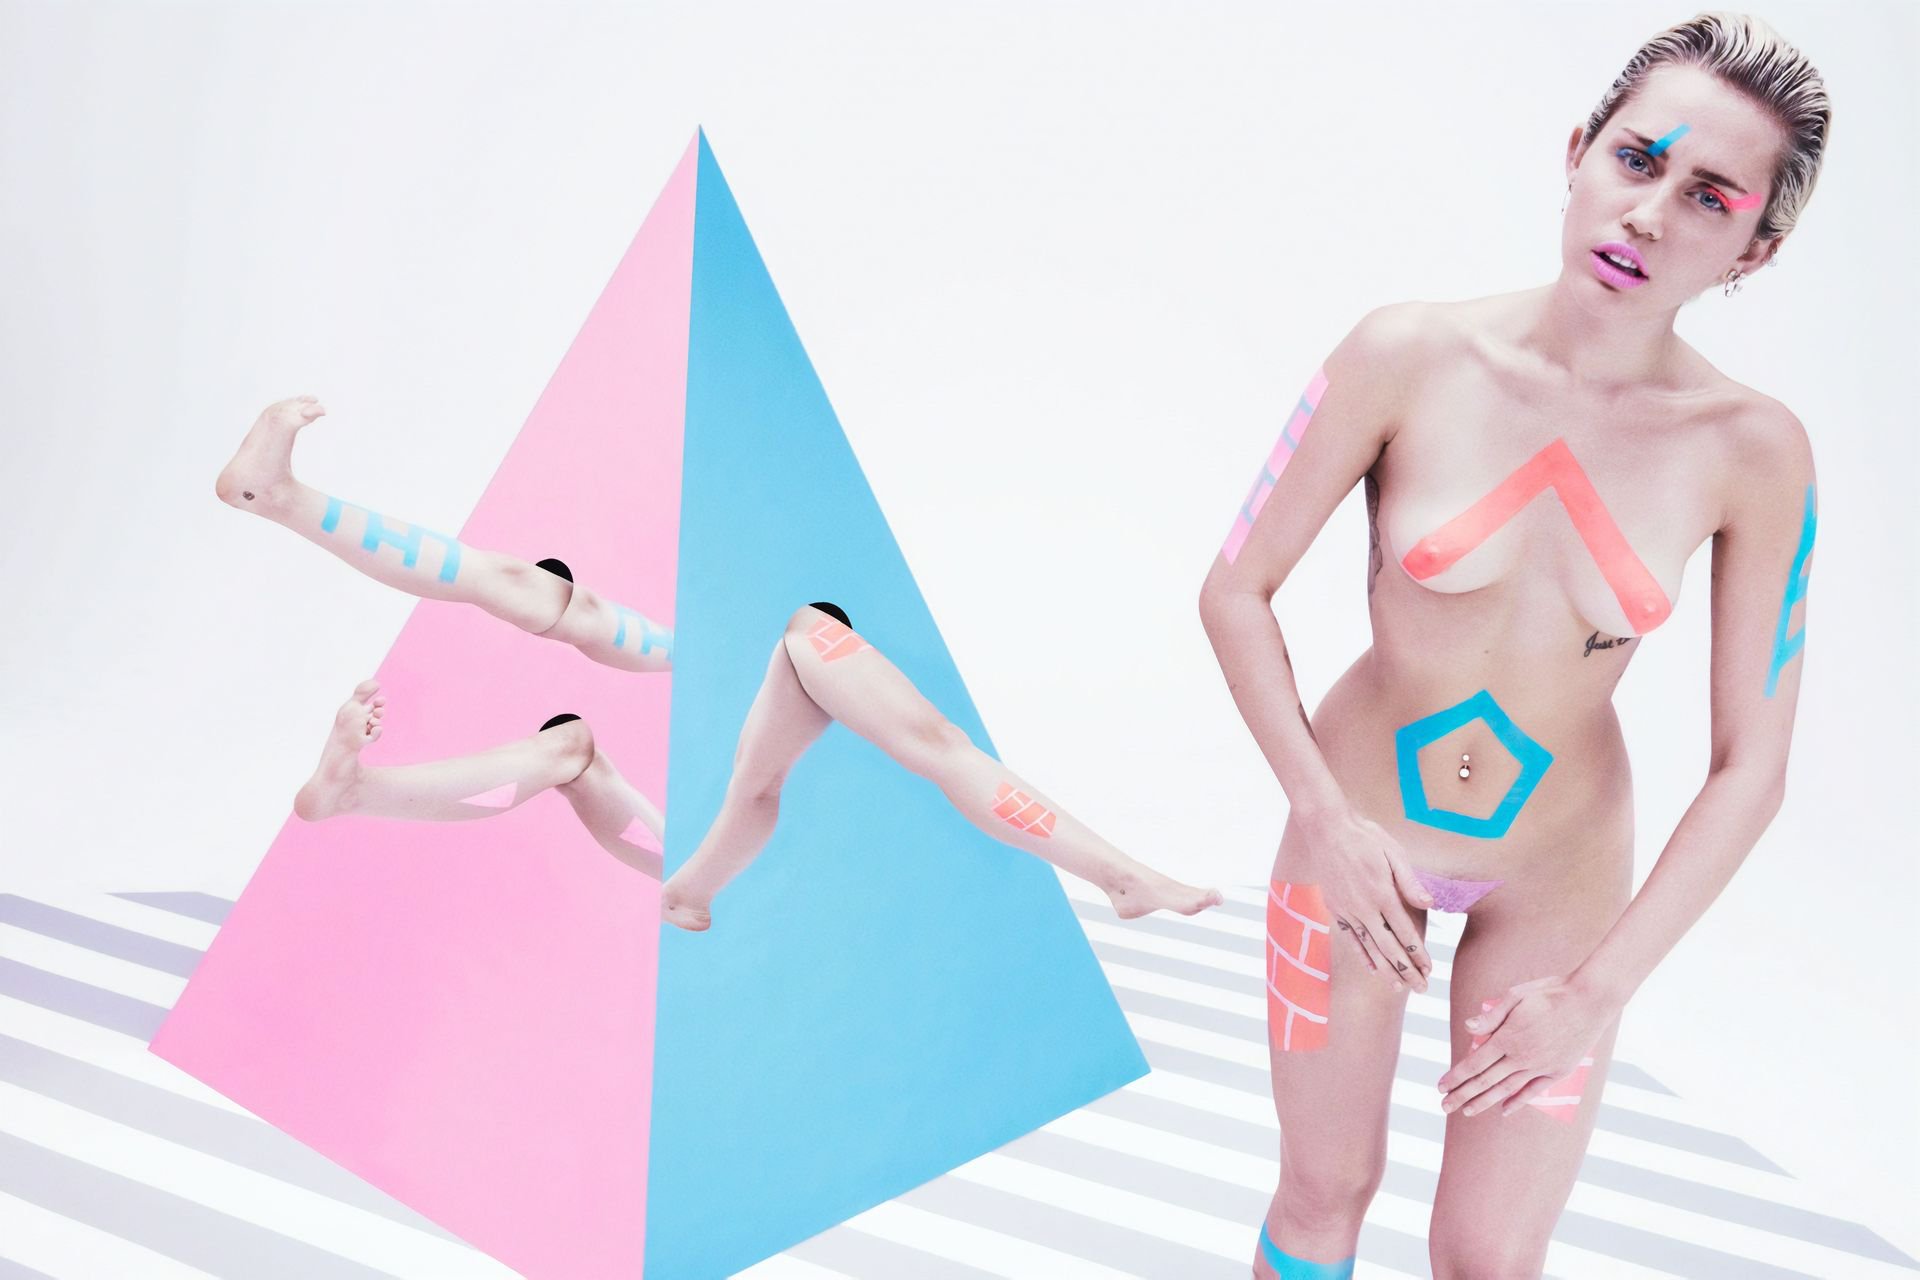 Miley Cyrus - Paper Magazine Naked Photoshoot Uncensored Outakes (NSFW). 